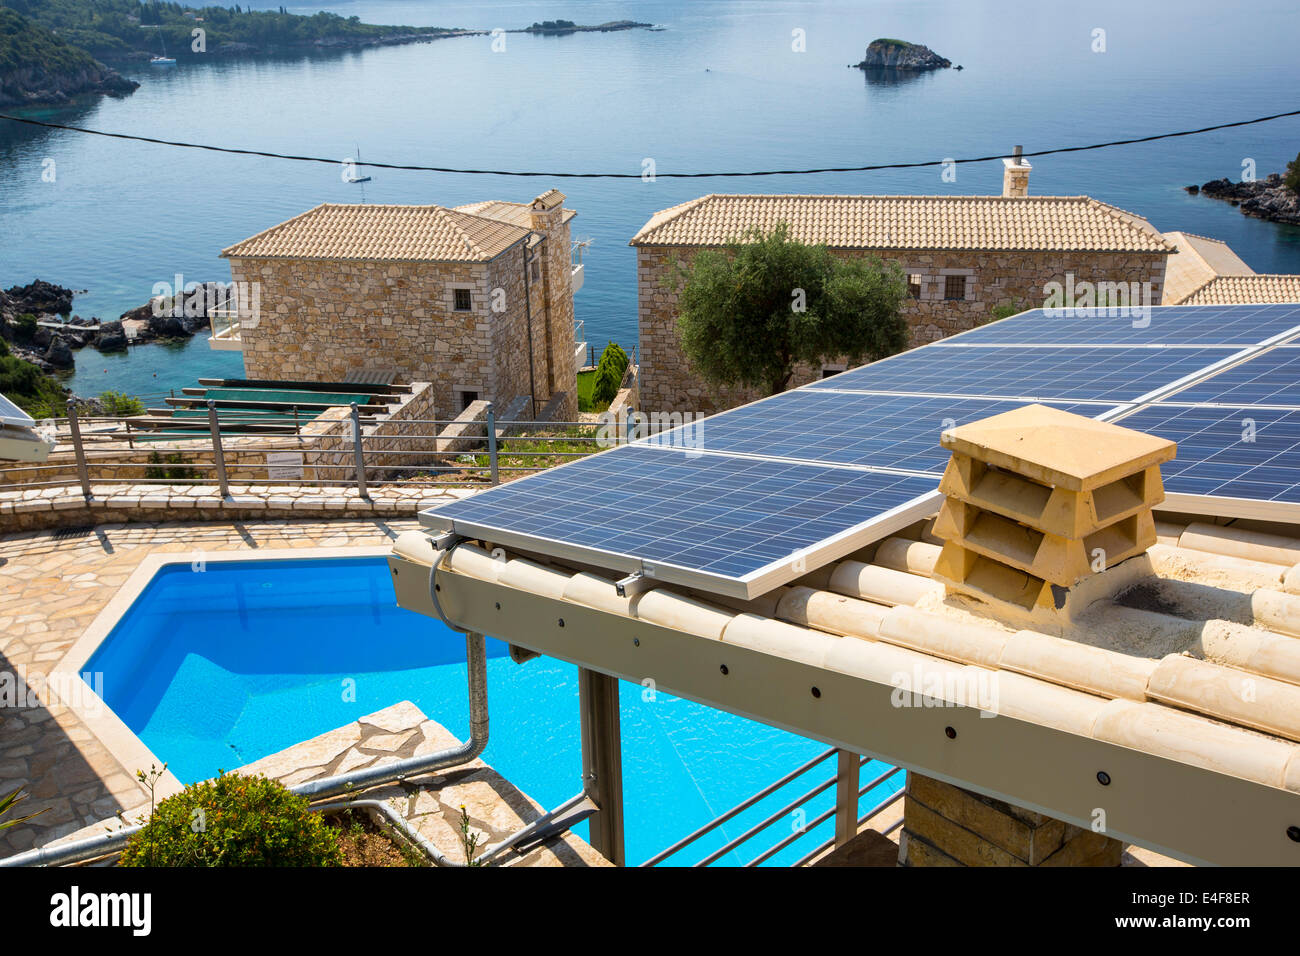 Solar panels on a house roof in Sivota, Greece. Stock Photo